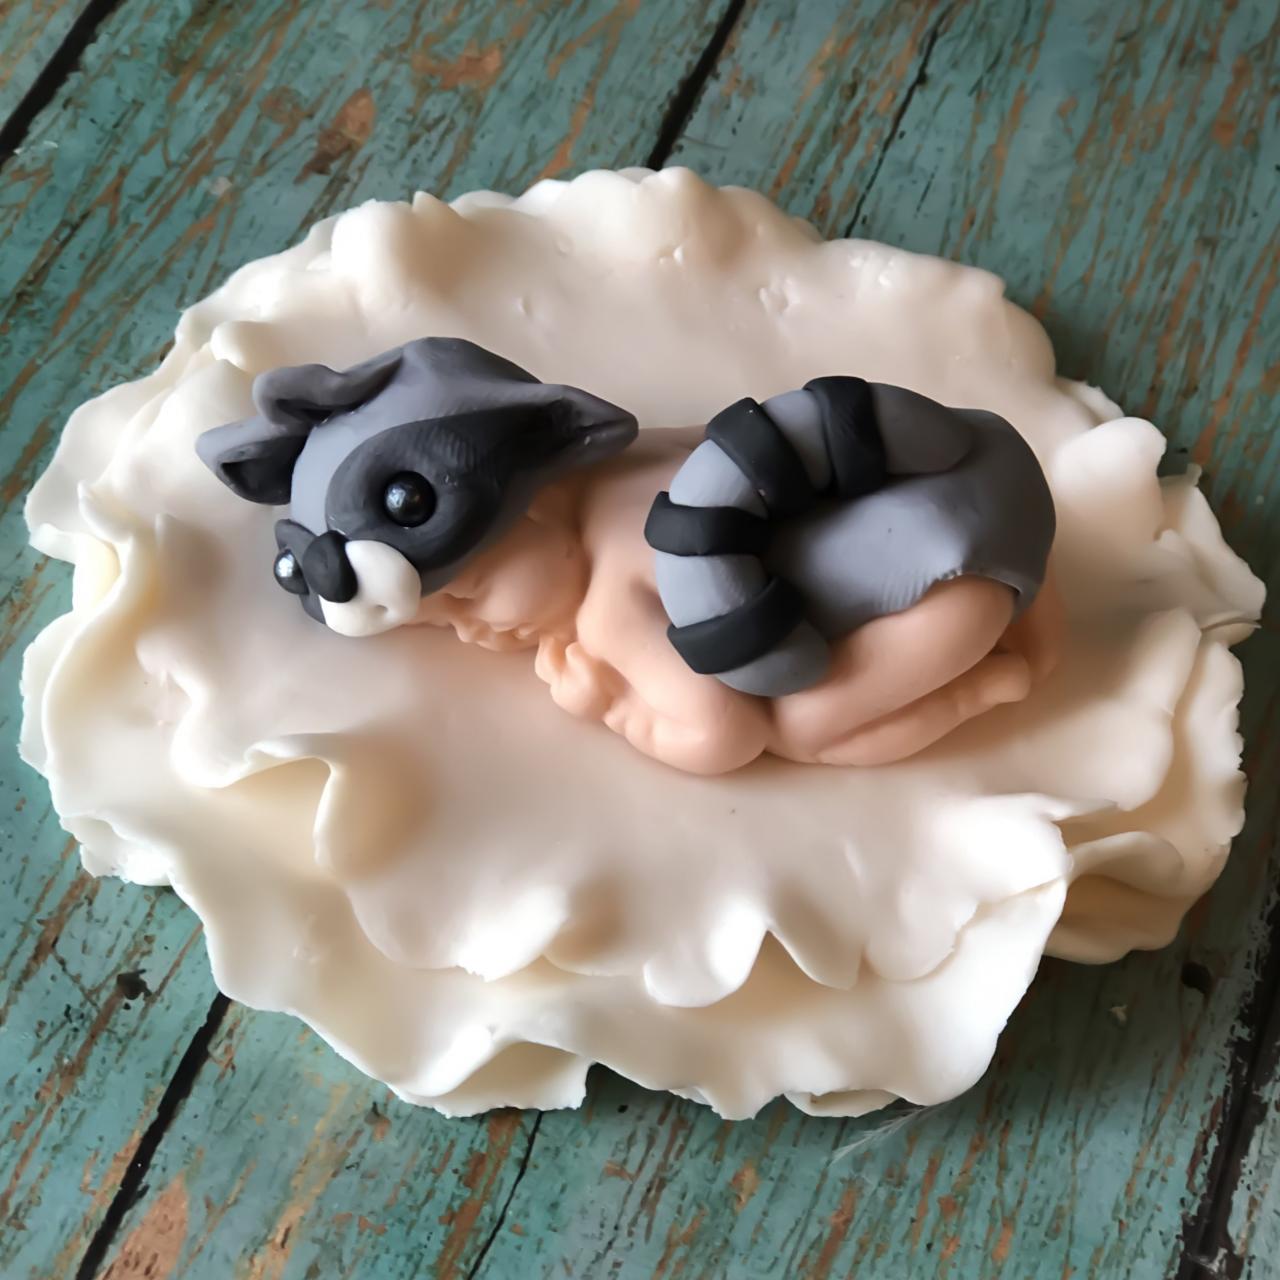 Woodland Baby Shower Cake Topper, Raccoon Baby Shower, Raccoon Cake Topper, Fondant Raccoon Cake Topper, Woodland Animal Cake Topper, Cake